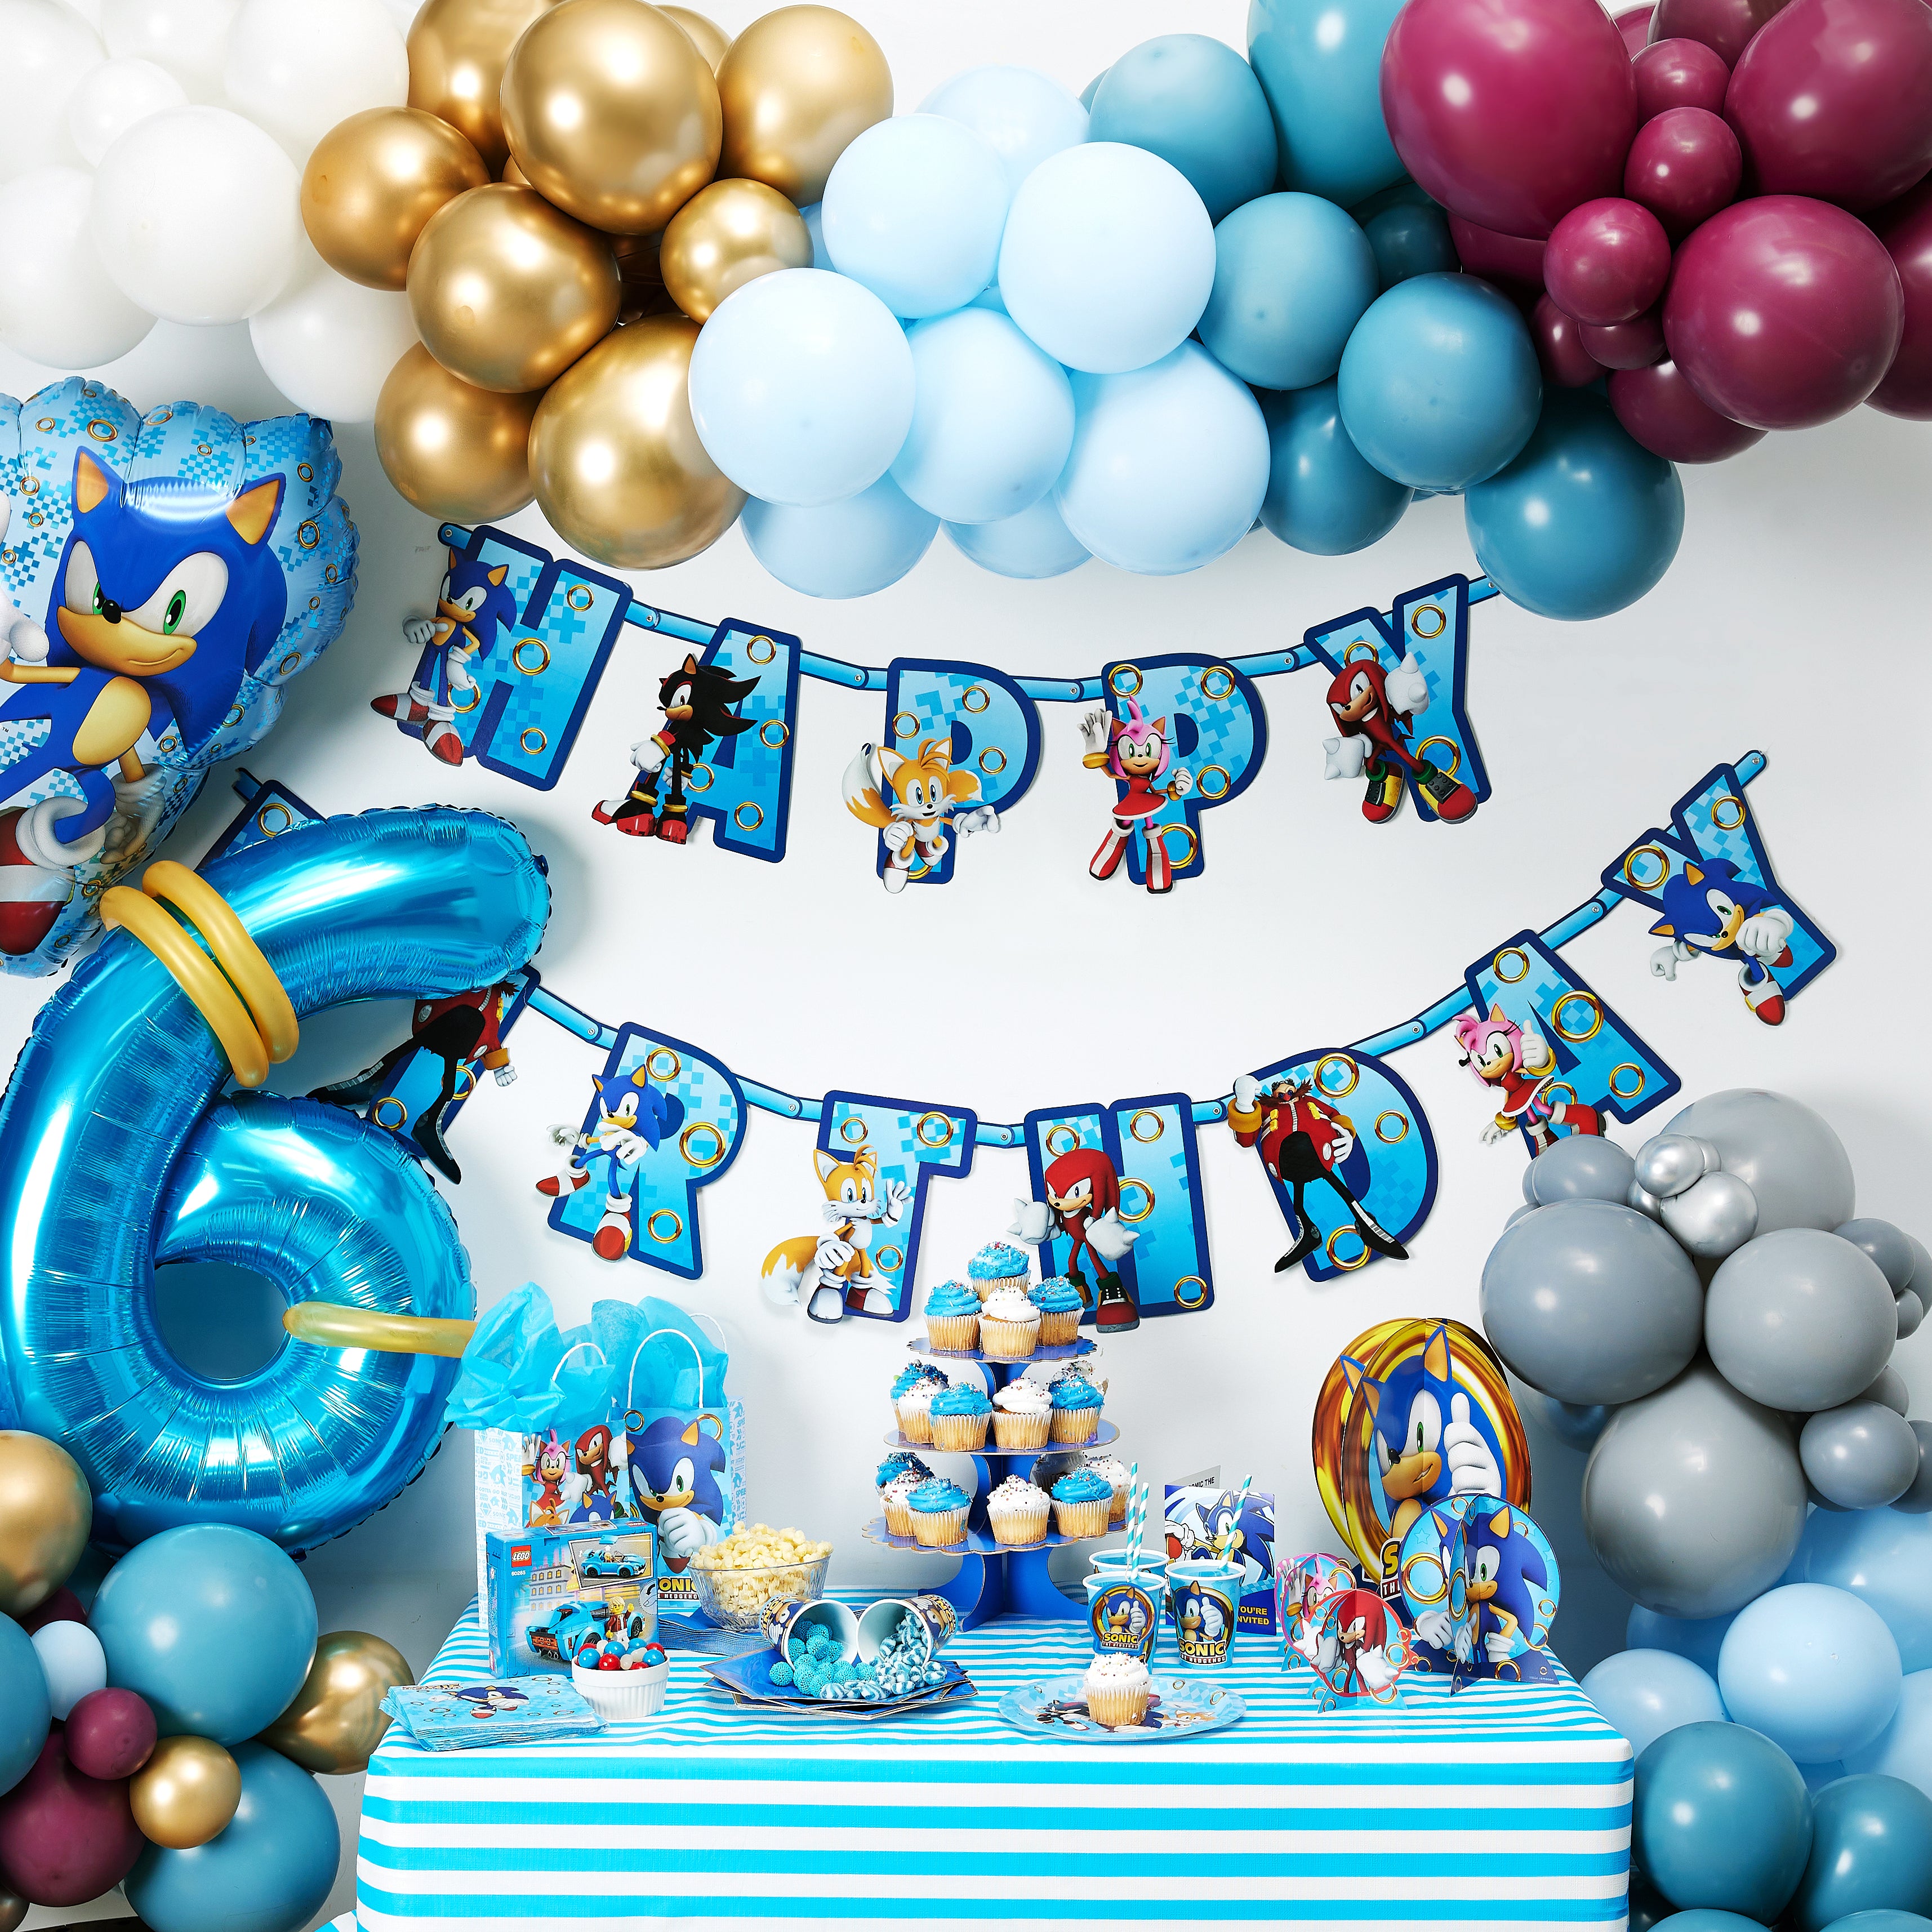 26 Of The Coolest Sonic The Hedgehog Birthday Party Ideas - Kids